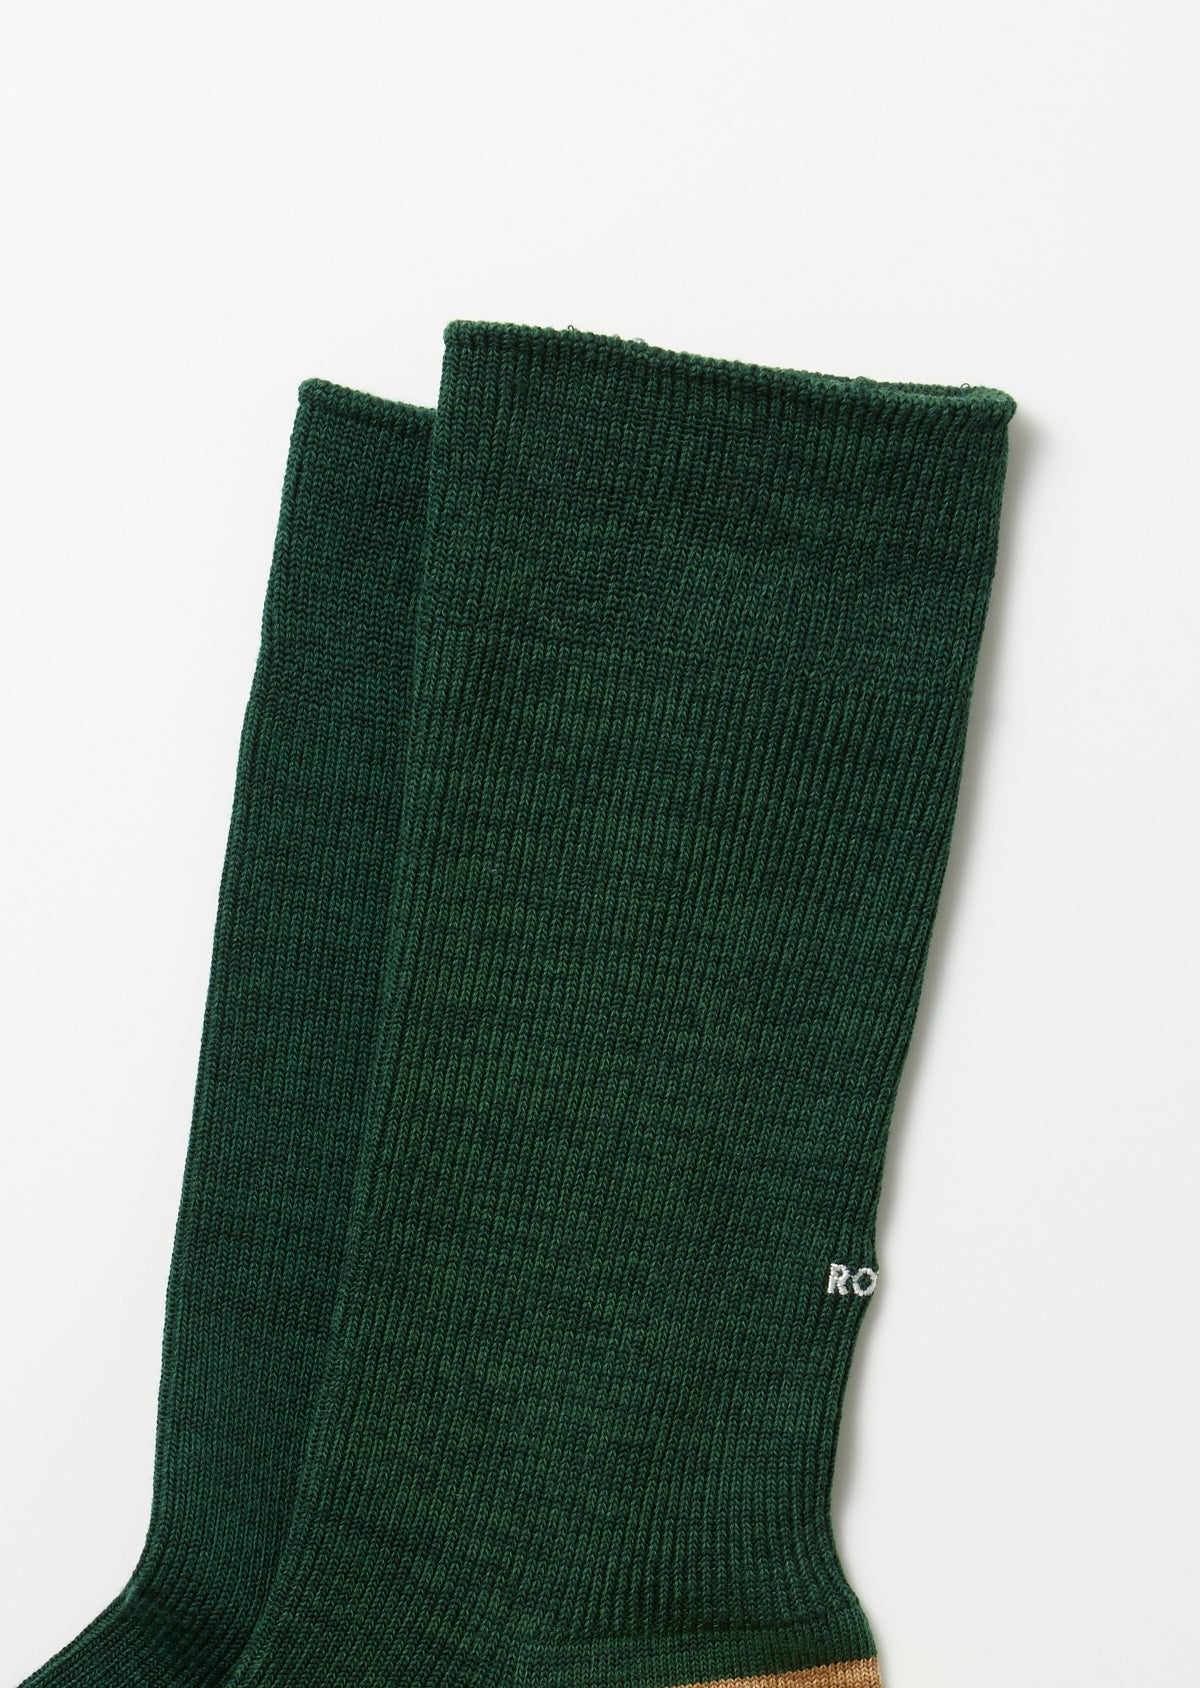 Organic Cotton & Recycle Polyester Ribbed Crew Socks